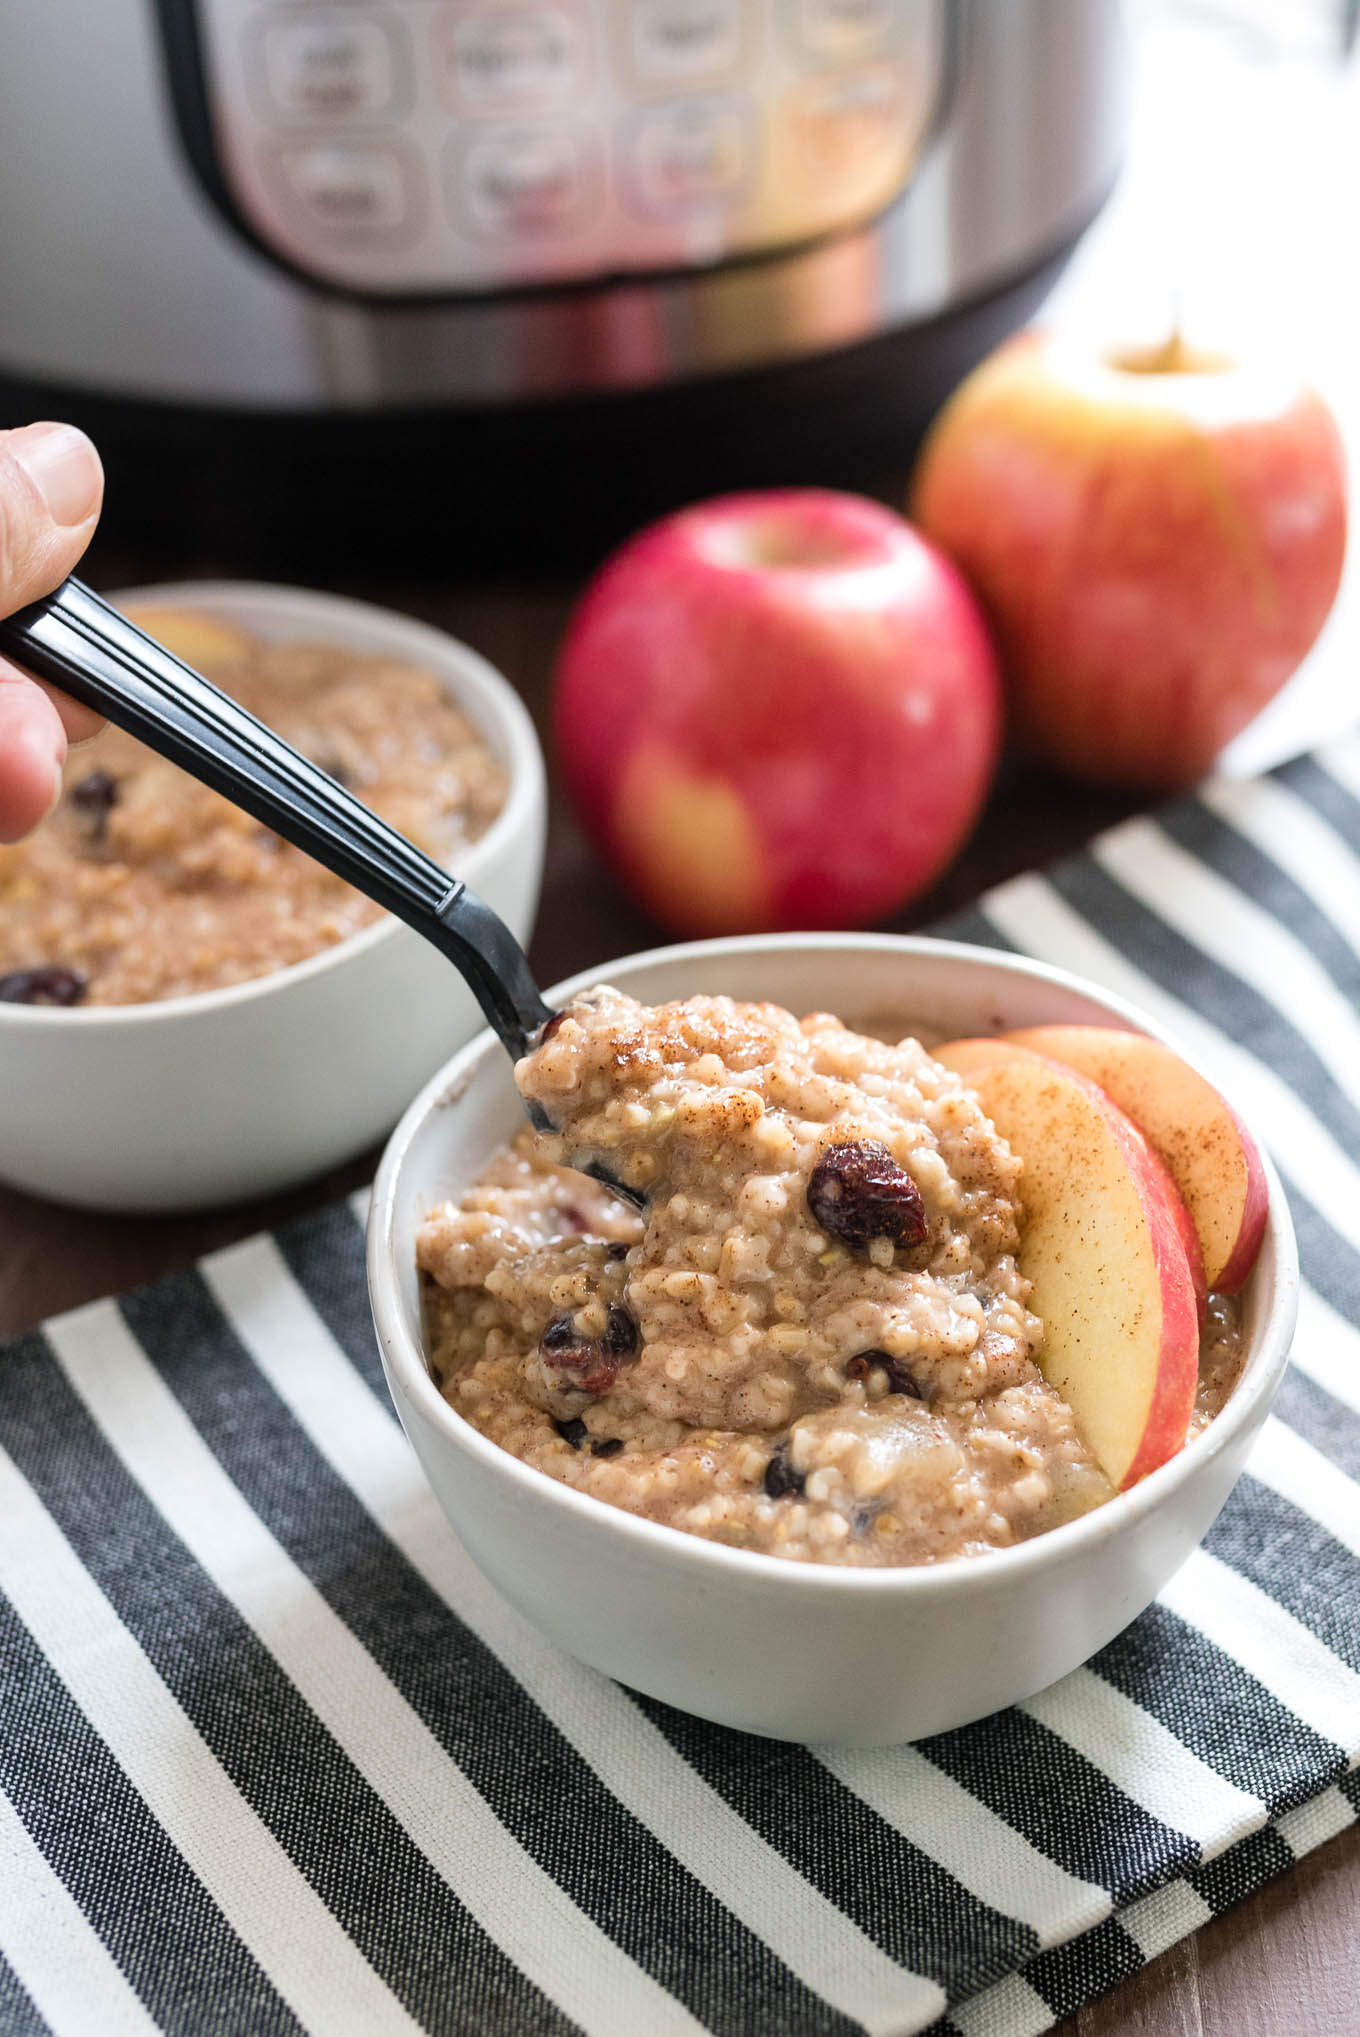 Instant Pot Apple Cranberry Steel Cut Oats are extra creamy and flavorful and you don't have to babysit the stovetop!